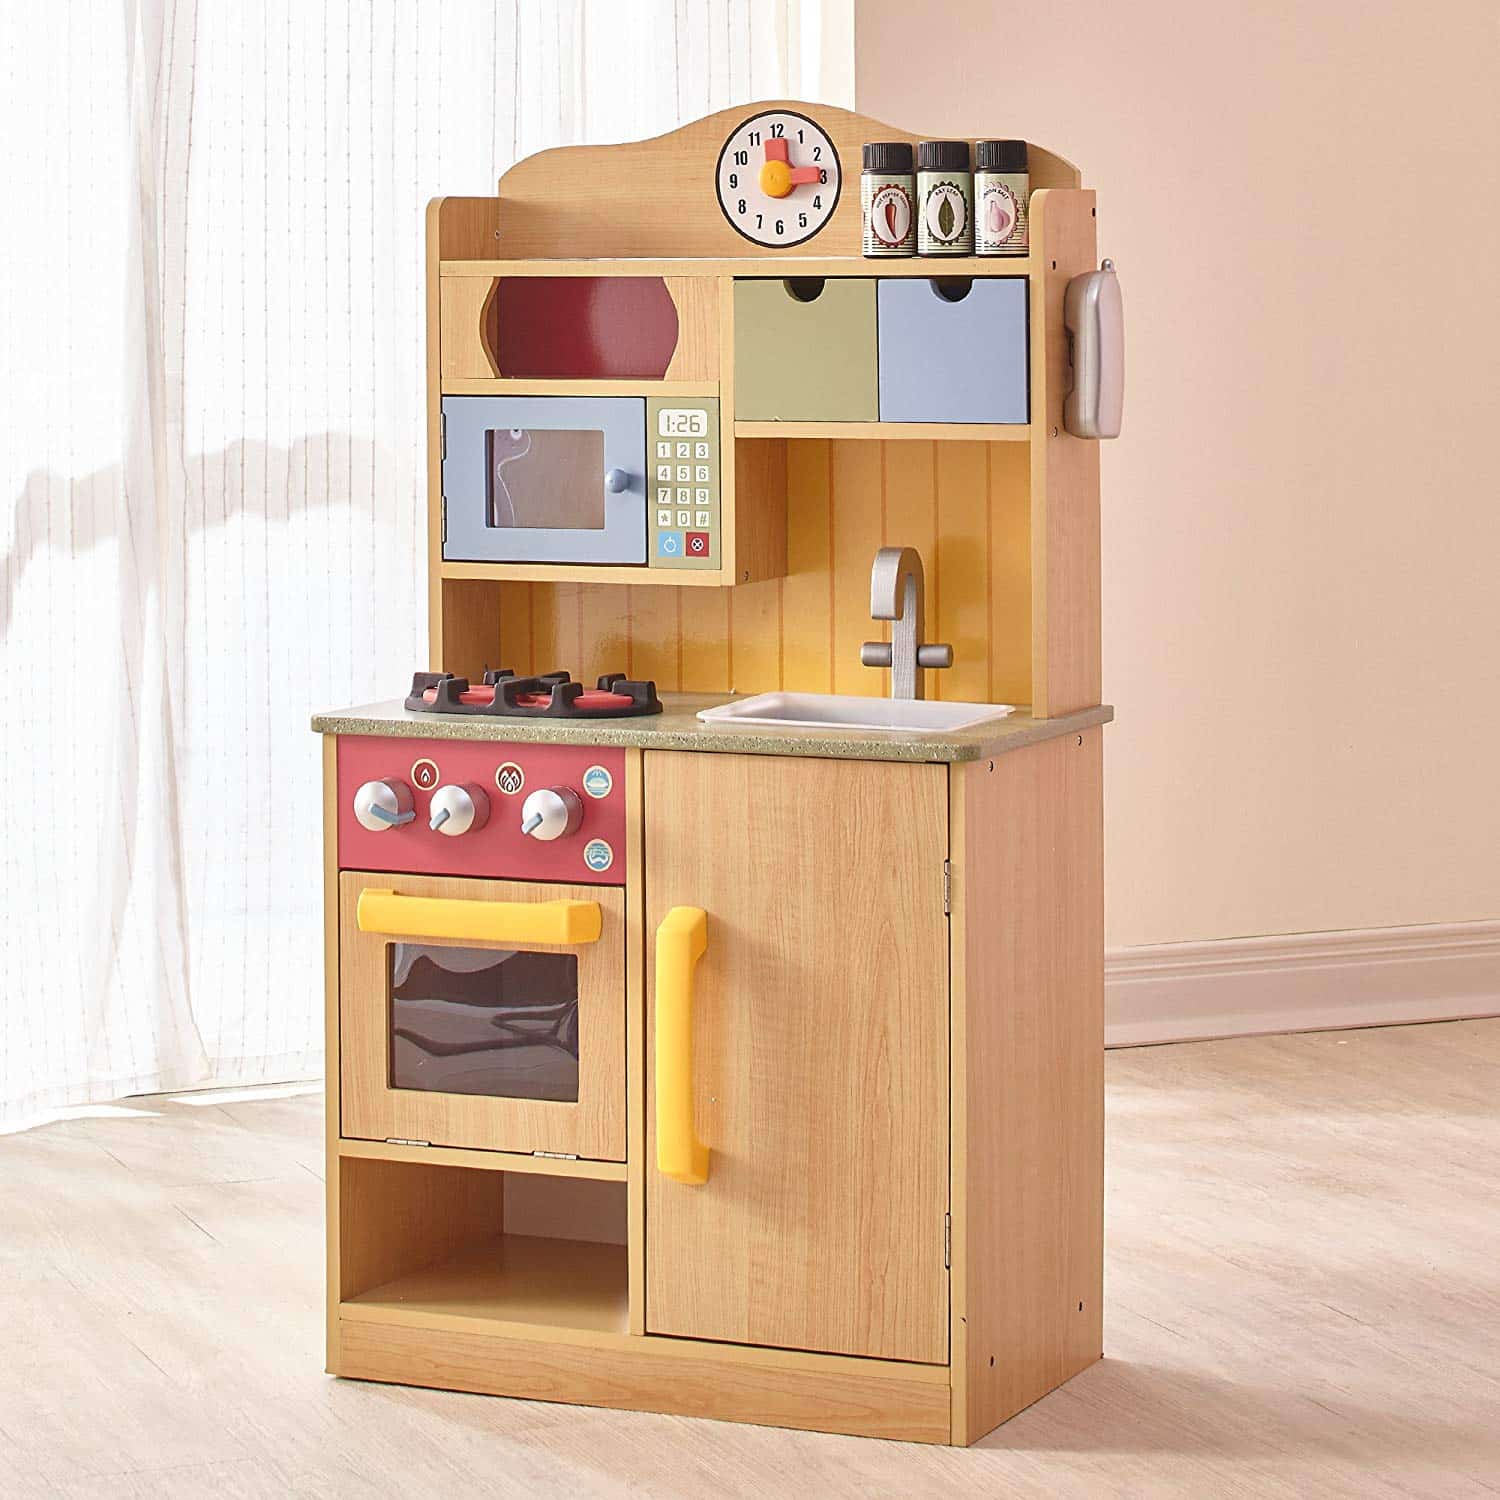 DEAL ALERT: Play Kitchen with Accessories – over $30 off!